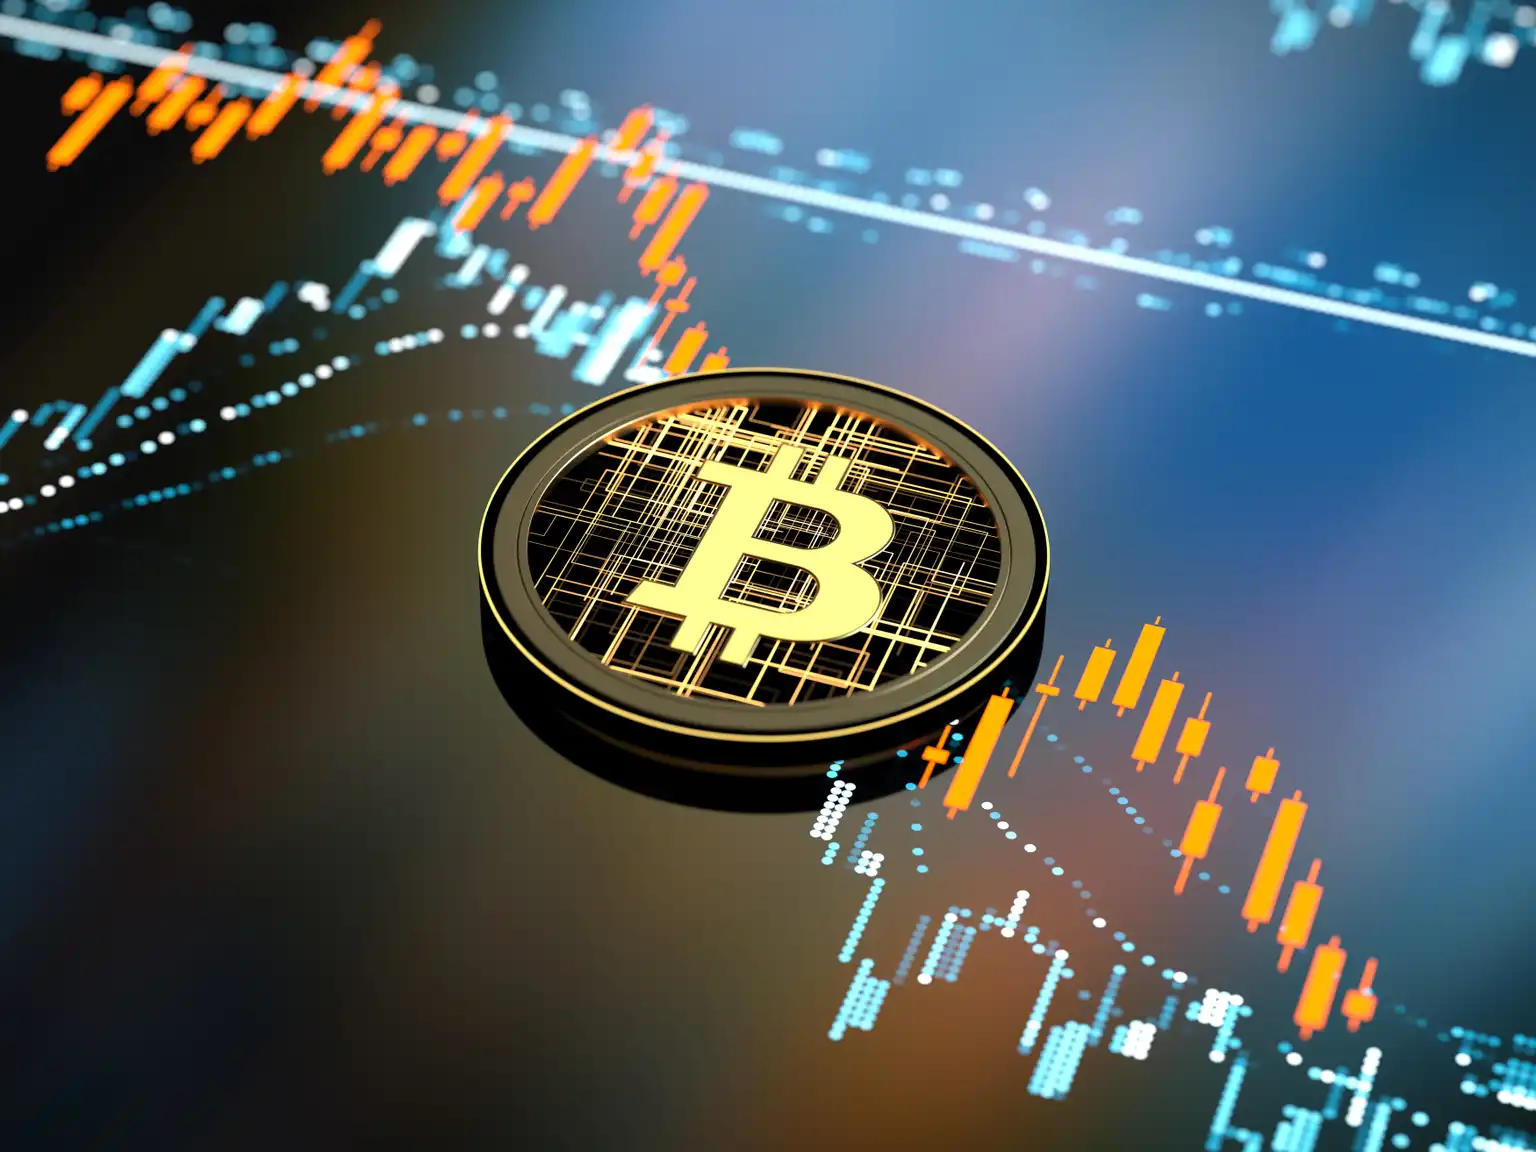 Market demand and supply dynamics affecting Bitcoin price fluctuations